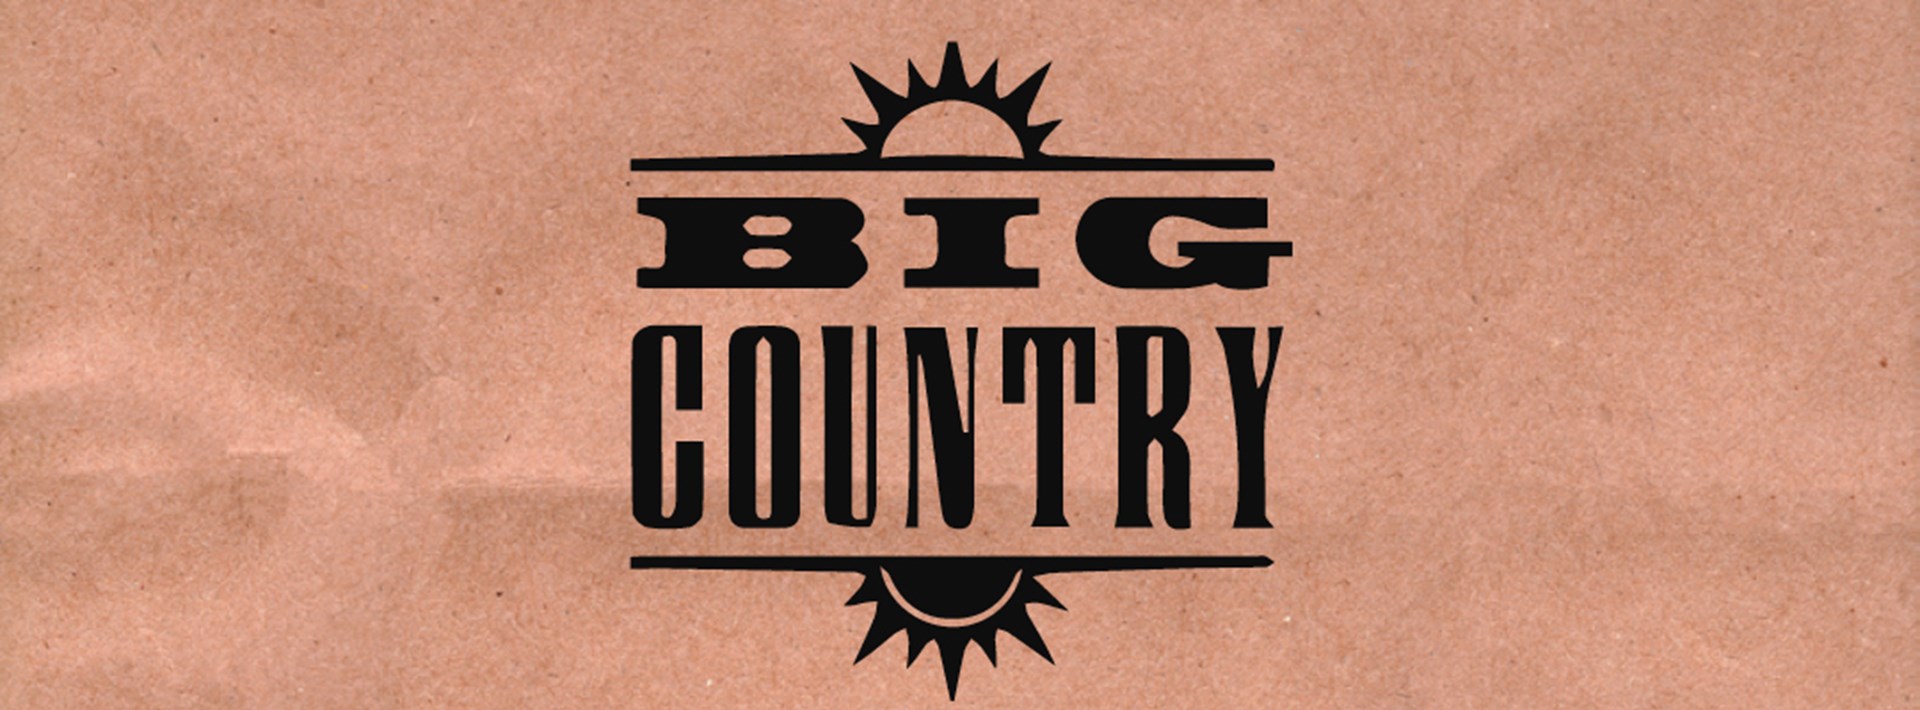 Big Country + Mike Peters 'Return To Steeltown'